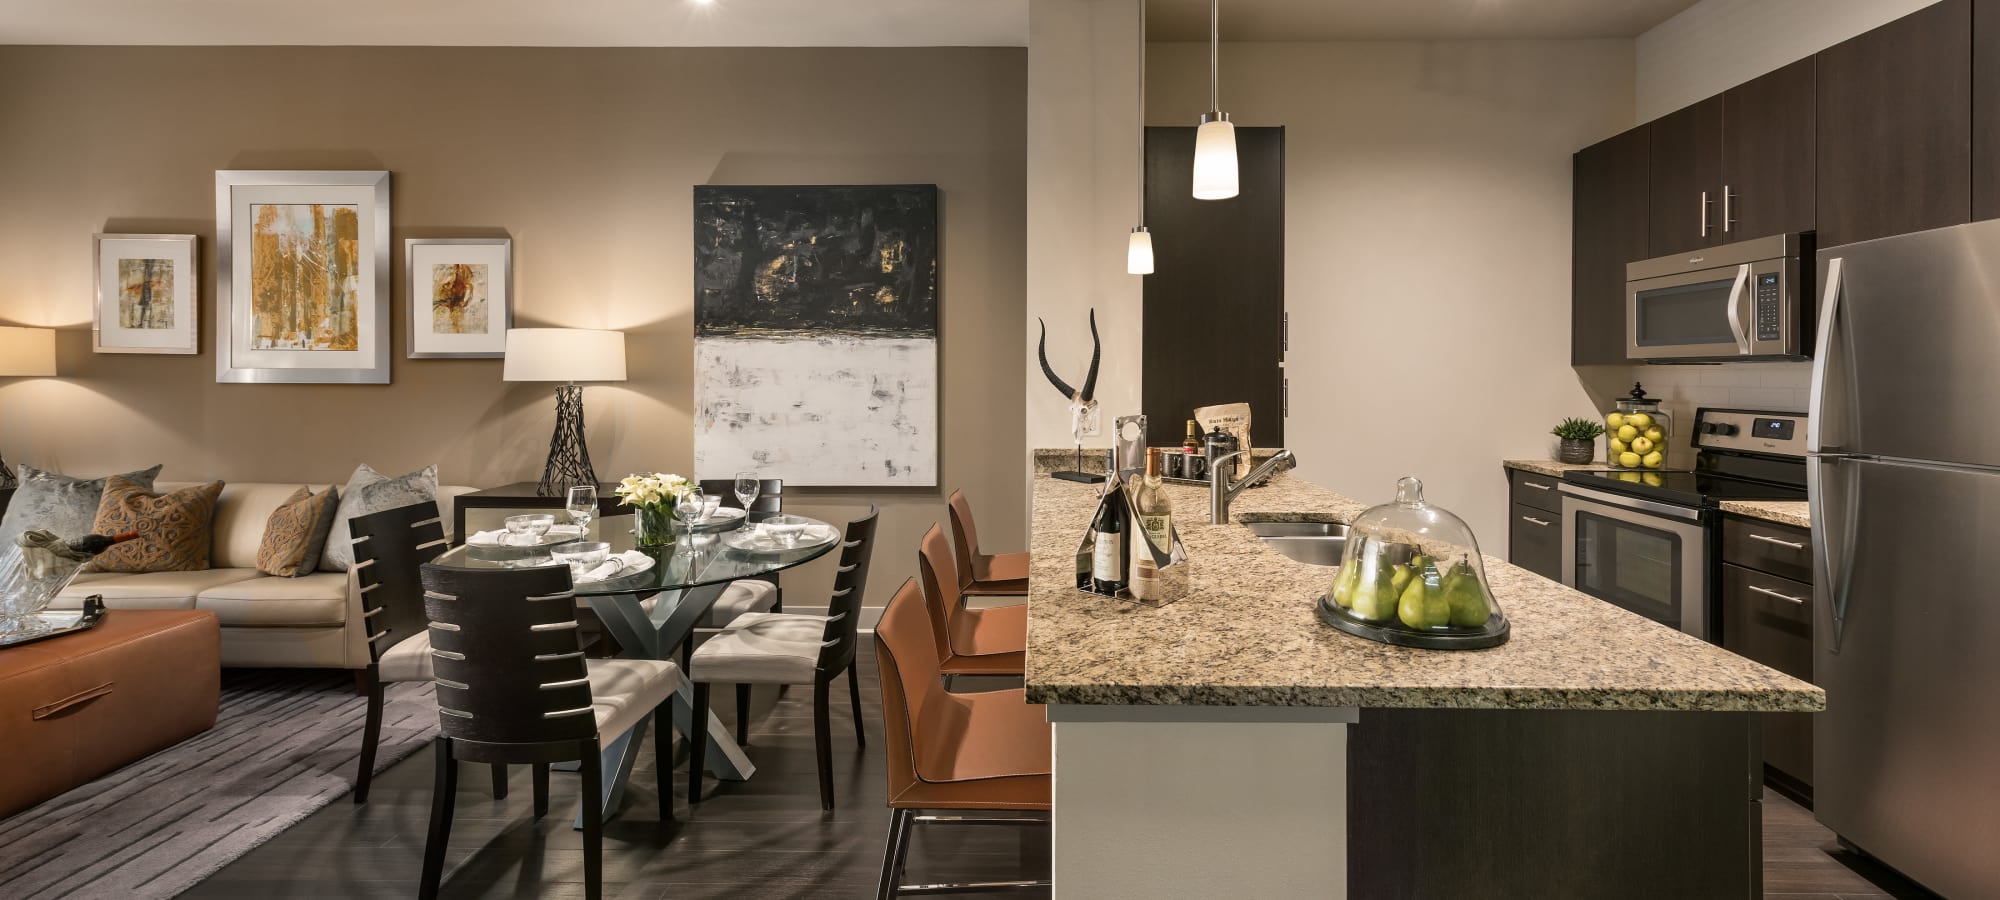 Open kitchen with breakfast bar at Emerson Mill Avenue in Tempe, Arizona